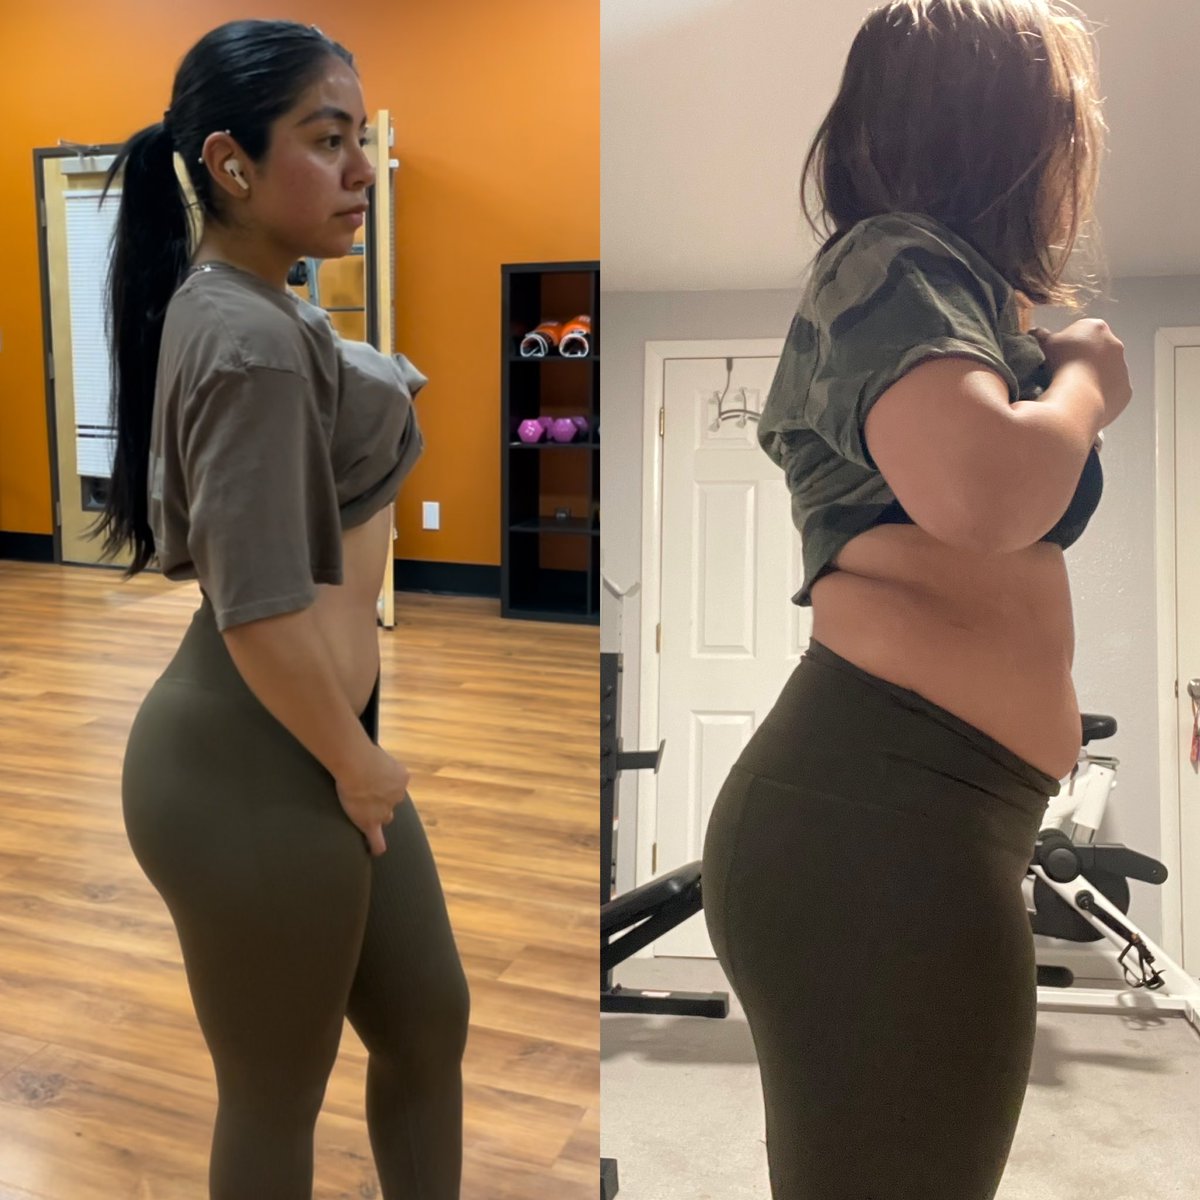 The difference in mindsets 🤝🏽

#weightloss #caloriedeficit #transformation #gymtransformation #gymgirl #gymmotivation #beforeandafter #gyminspo